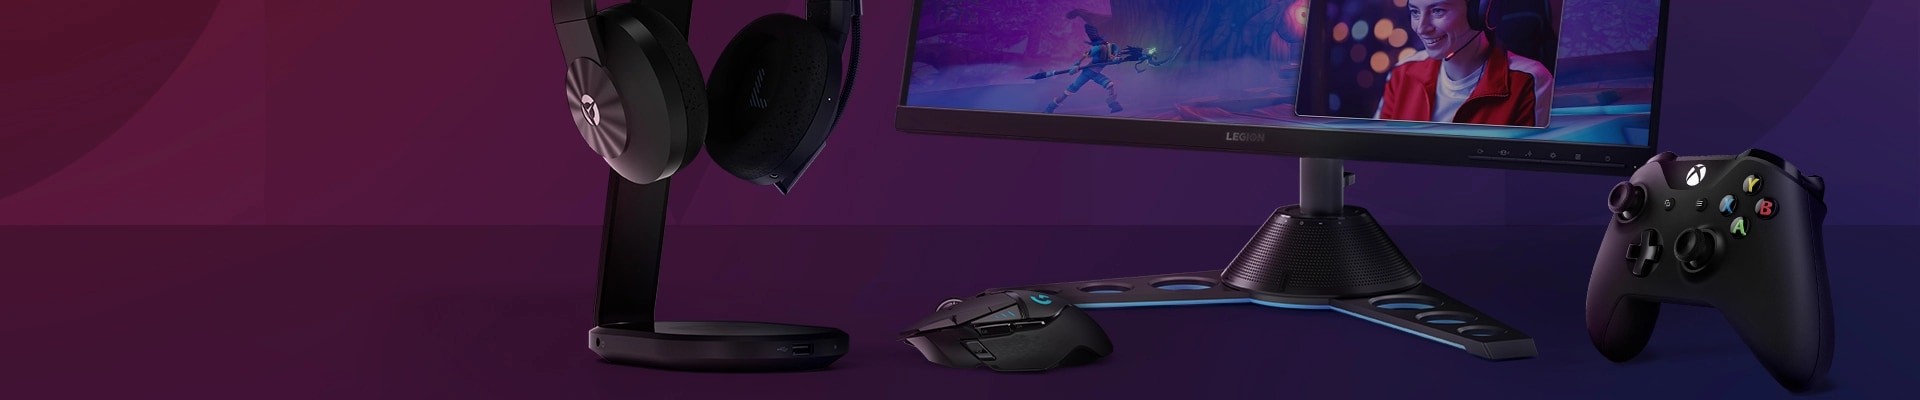 Upgrade or build out your gaming setup with premium PC gaming accessories from Lenovo & top brands.